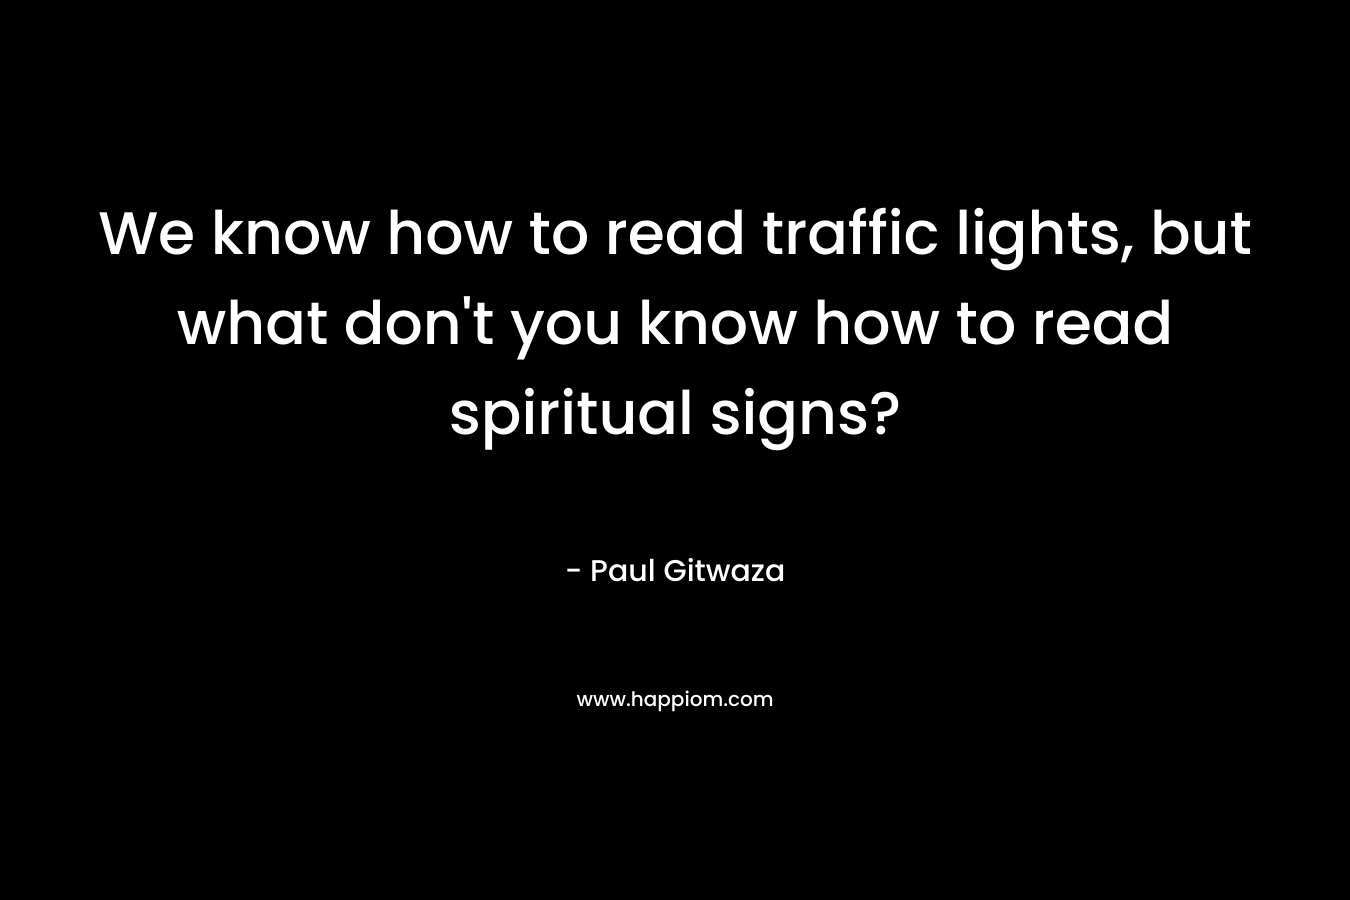 We know how to read traffic lights, but what don't you know how to read spiritual signs?